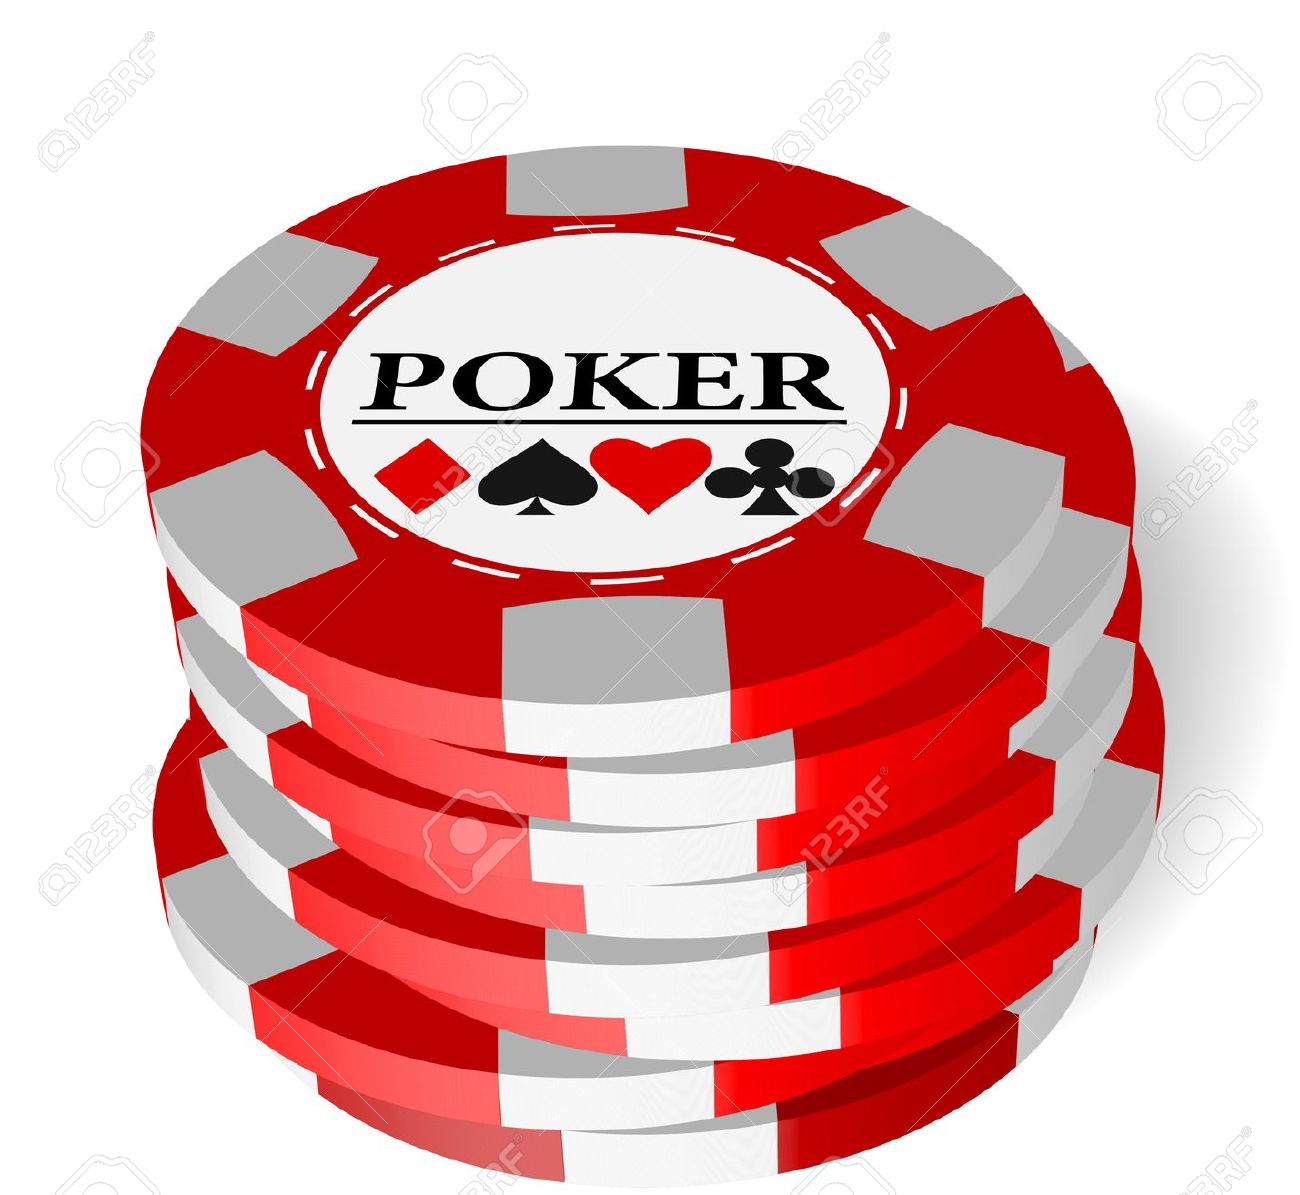 Poker chips clipart free ClipartFest ClipartFest of gambling chips